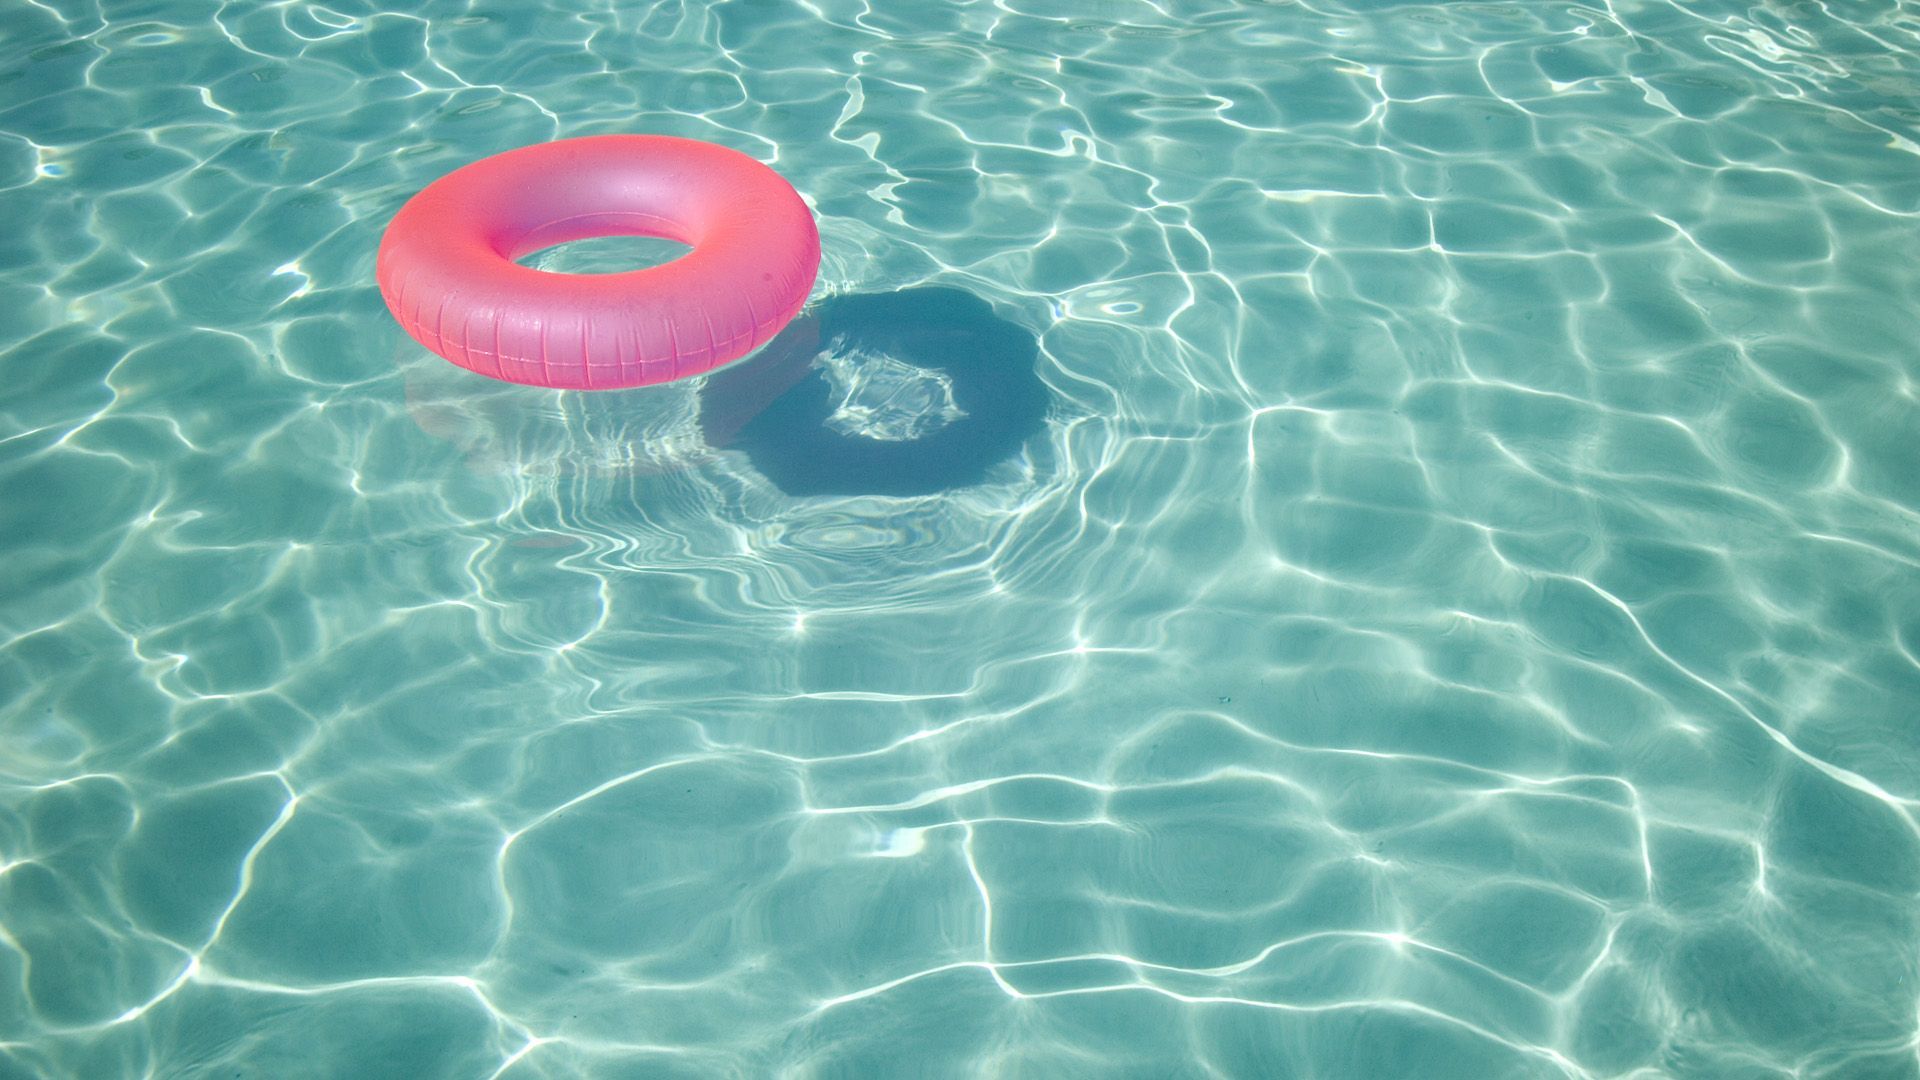 A pink float is floating in the water - Summer, swimming pool